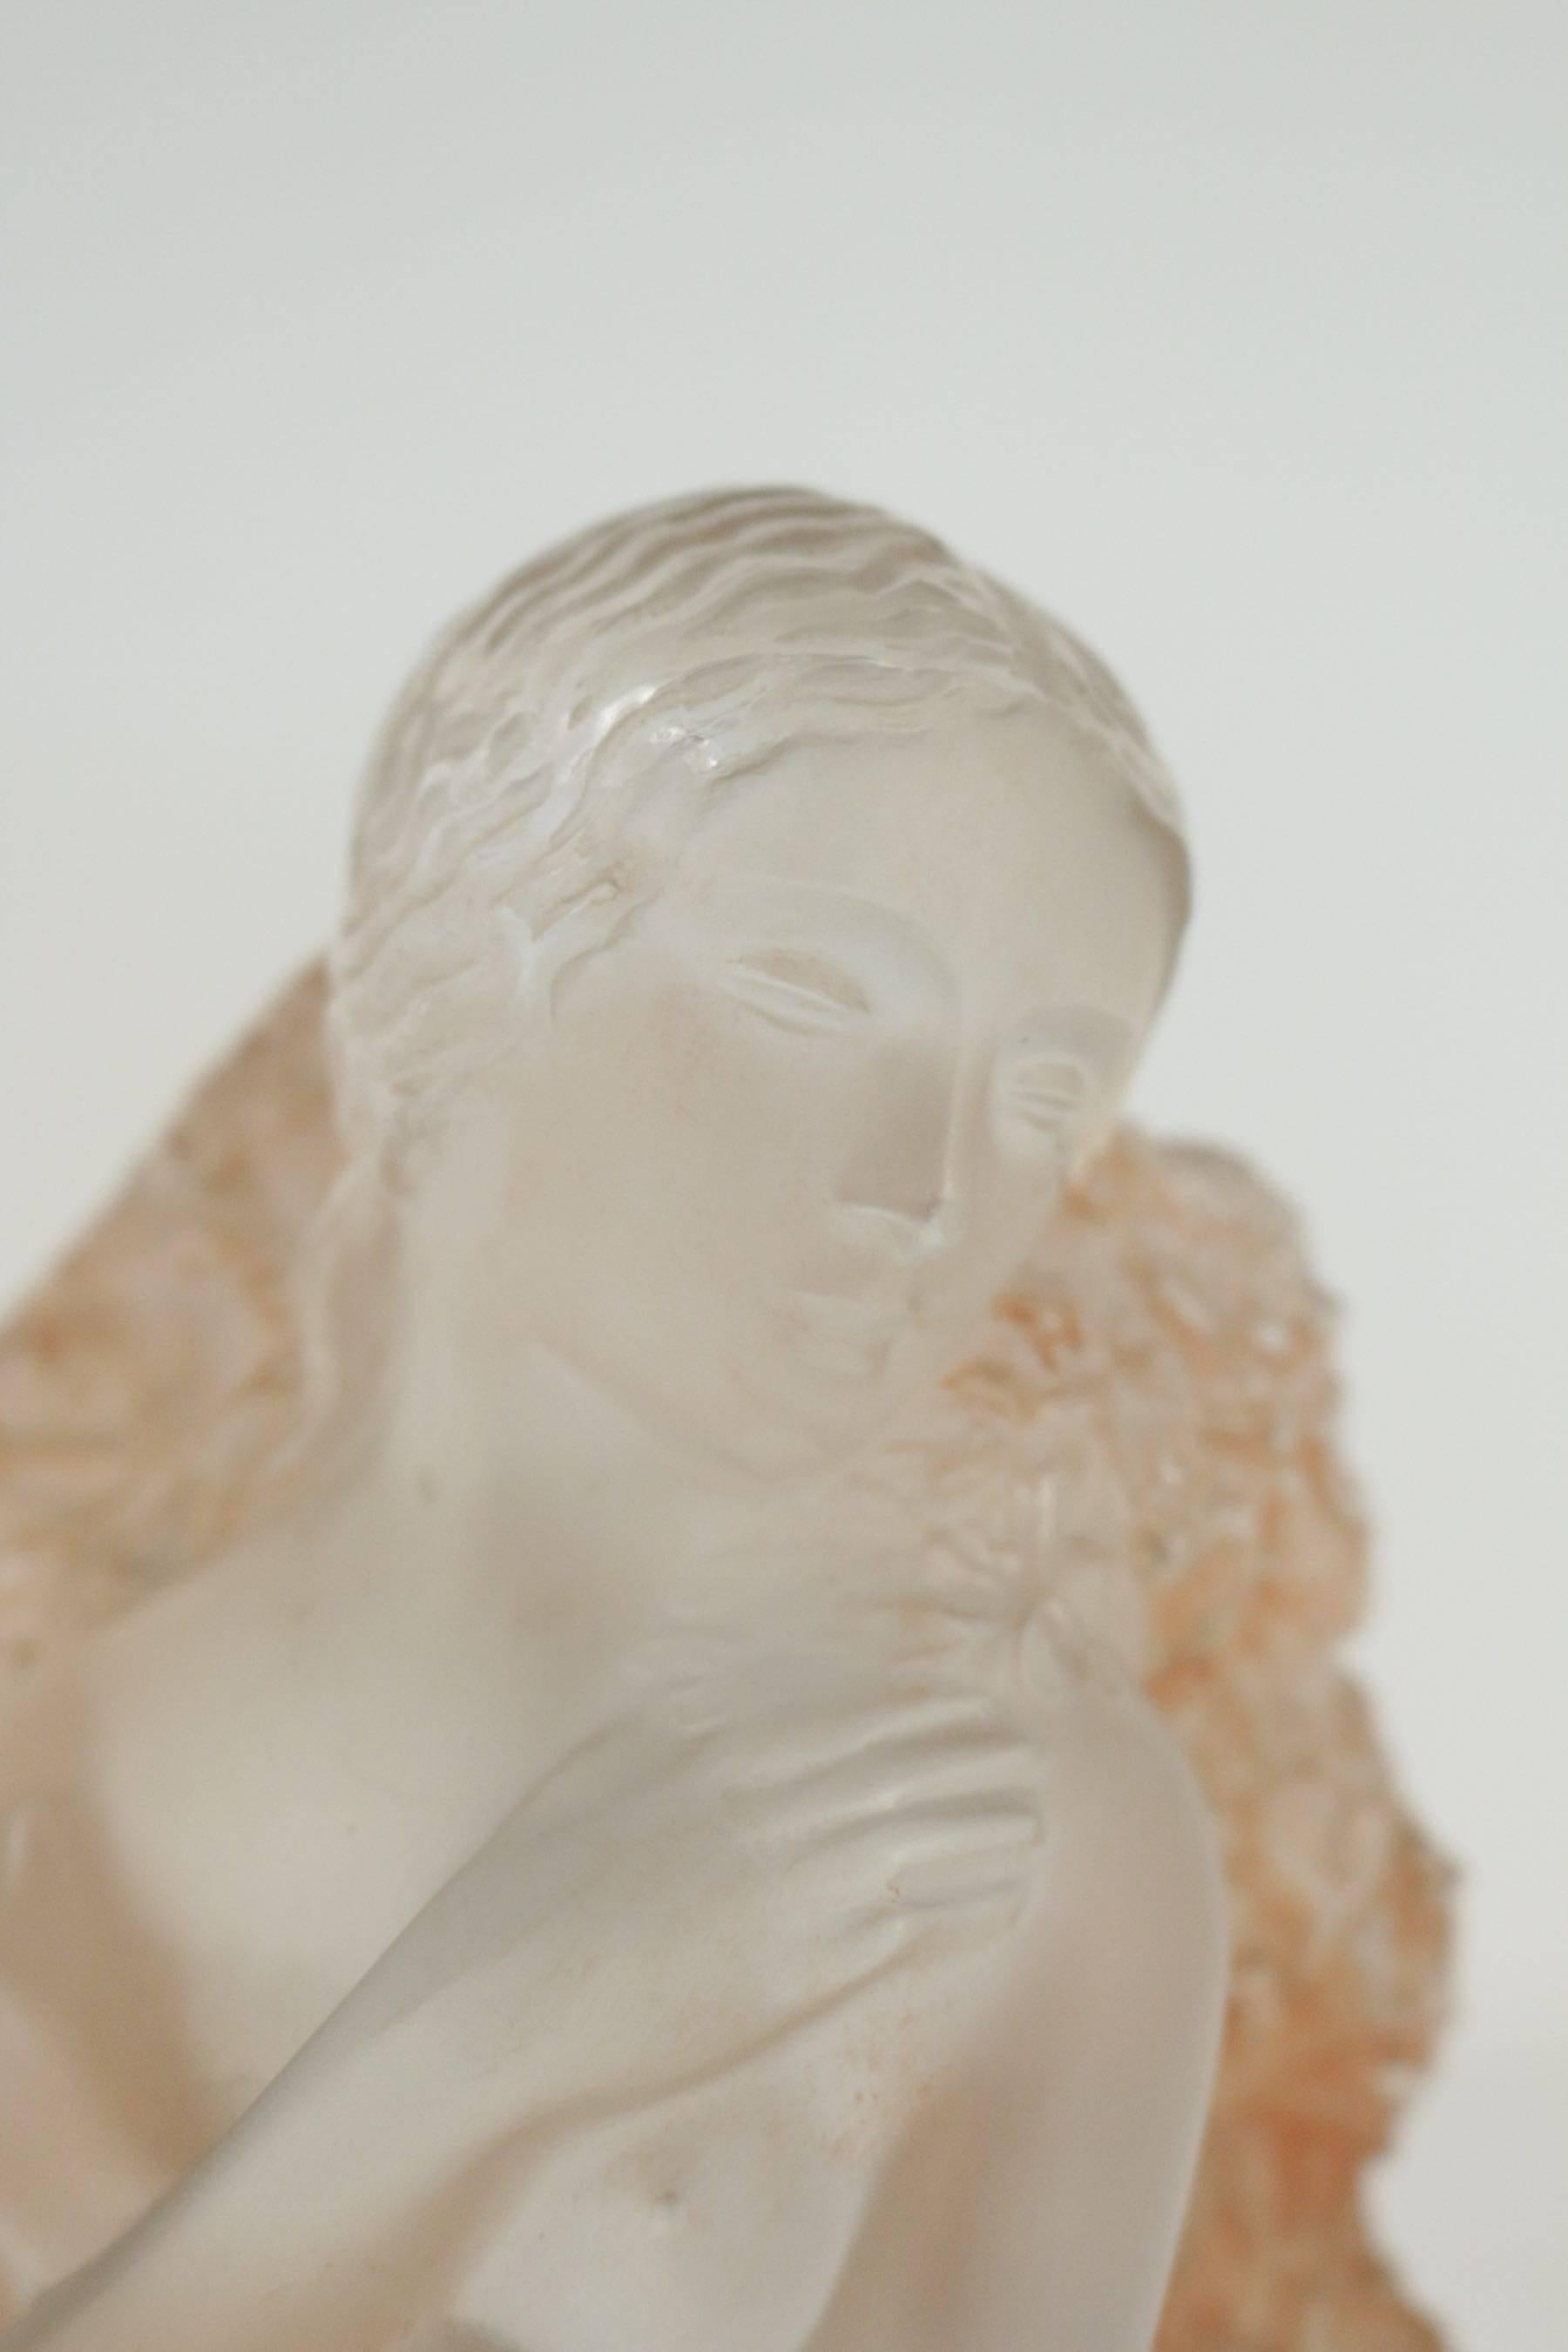 Lalique Statue Hiver: 
19.5 cm tall glass kneeling or seated female with arms crossed and covered in mistletoe with sepia patination R. Lalique Statue representing winter in the series of the four seasons. 
Model: 842bis, circa 1939.
Lalique